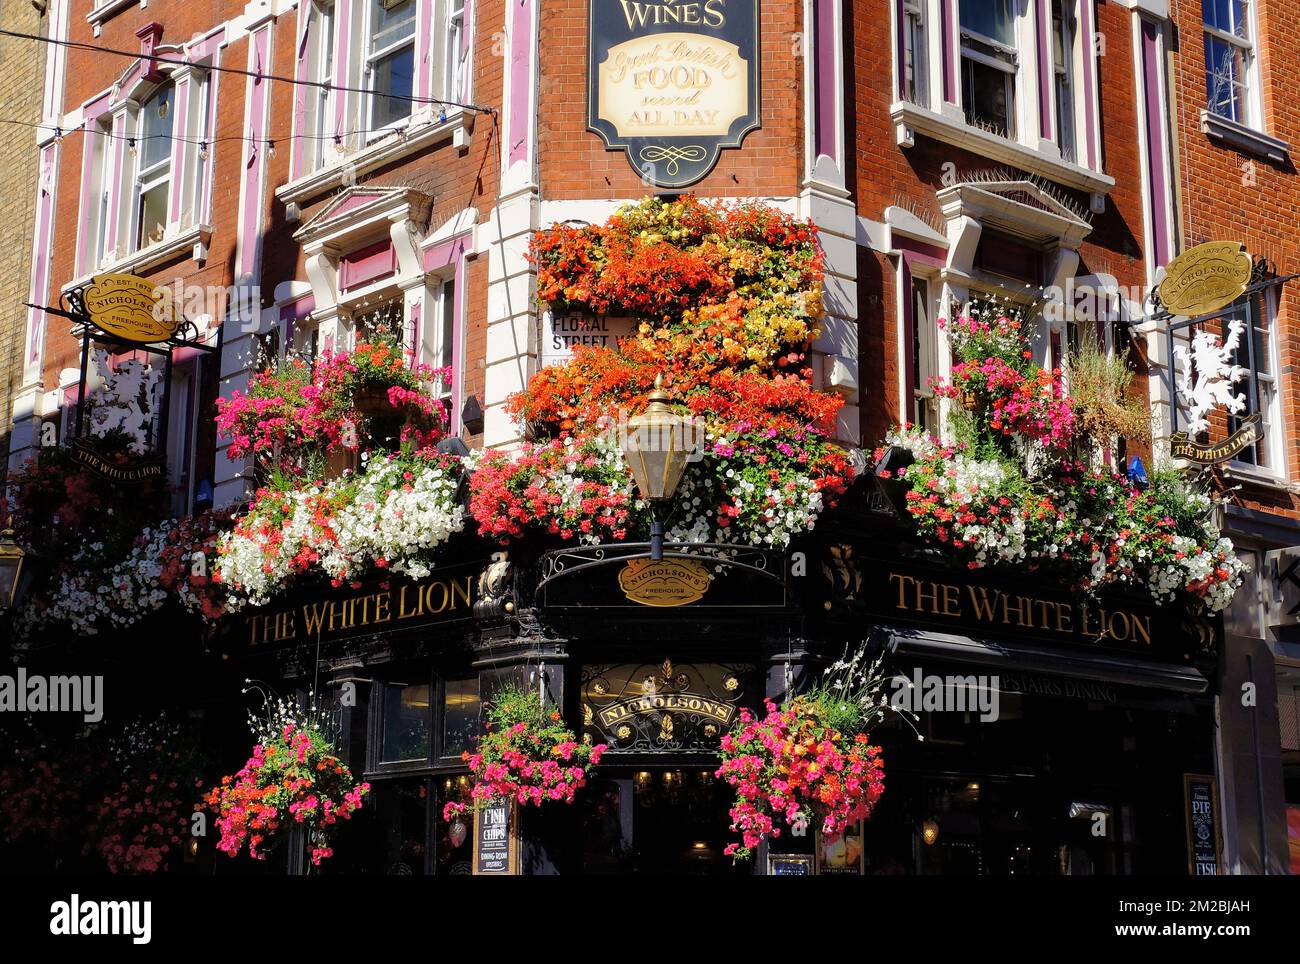 Colourful flowers outside the White Lion pub in Floral Street, Covent Garden, London, England Stock Photo